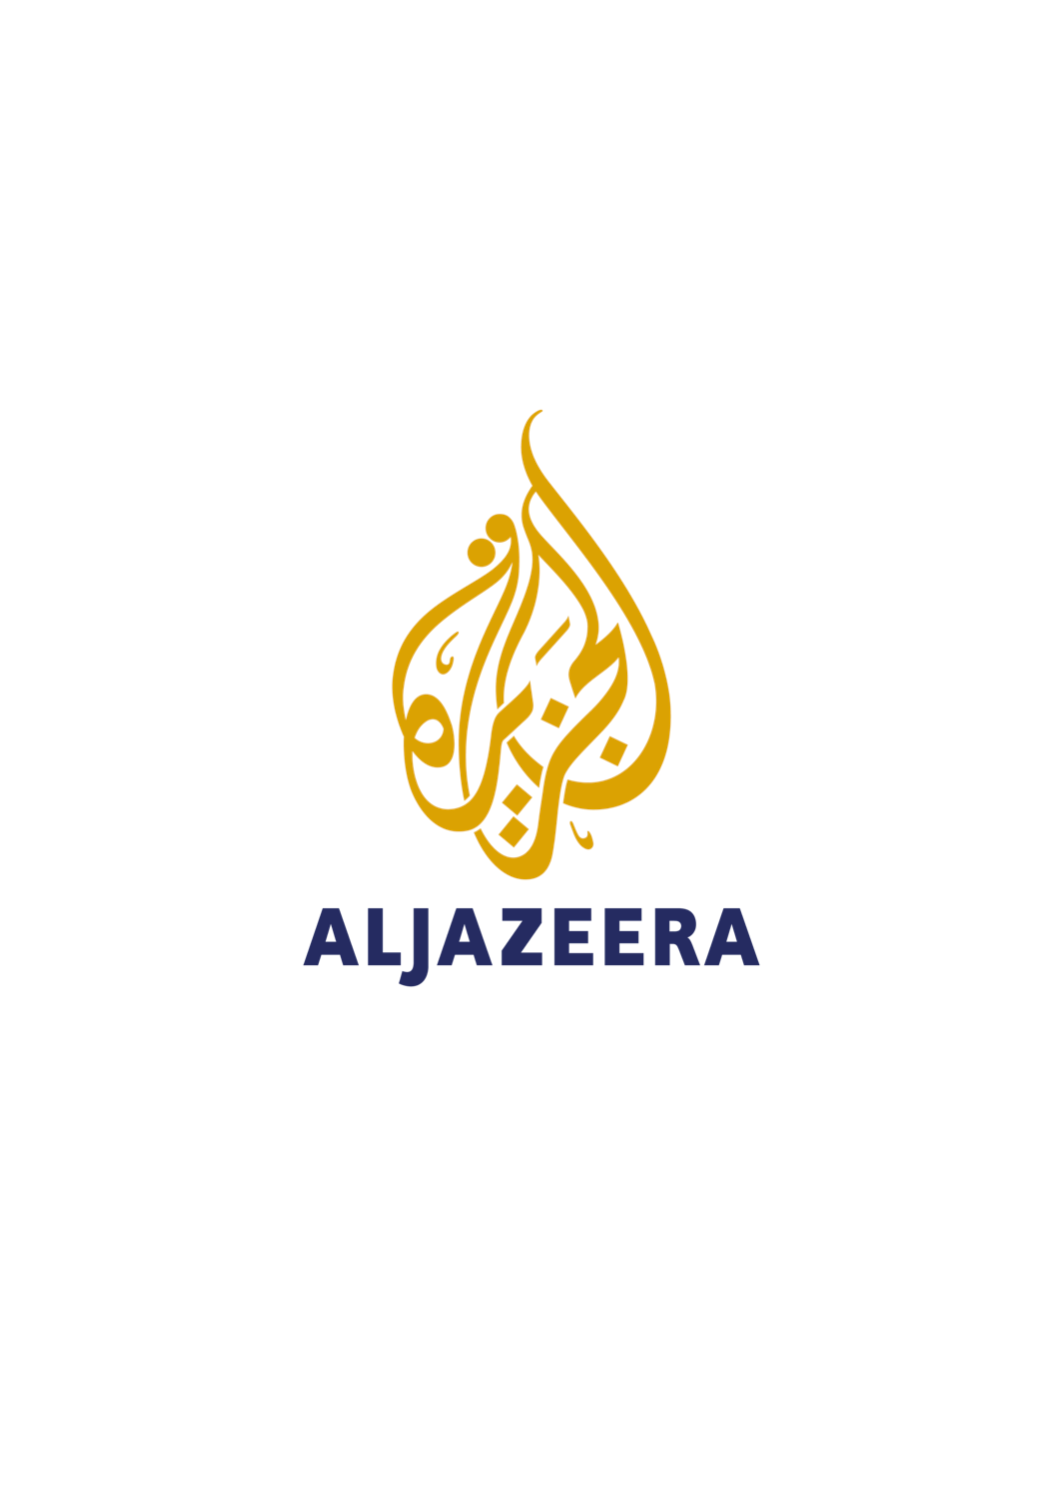 Logo of Al Jazeera, with the name drawn in Arabic in gold calligraphy above the name printed in English in blue font.